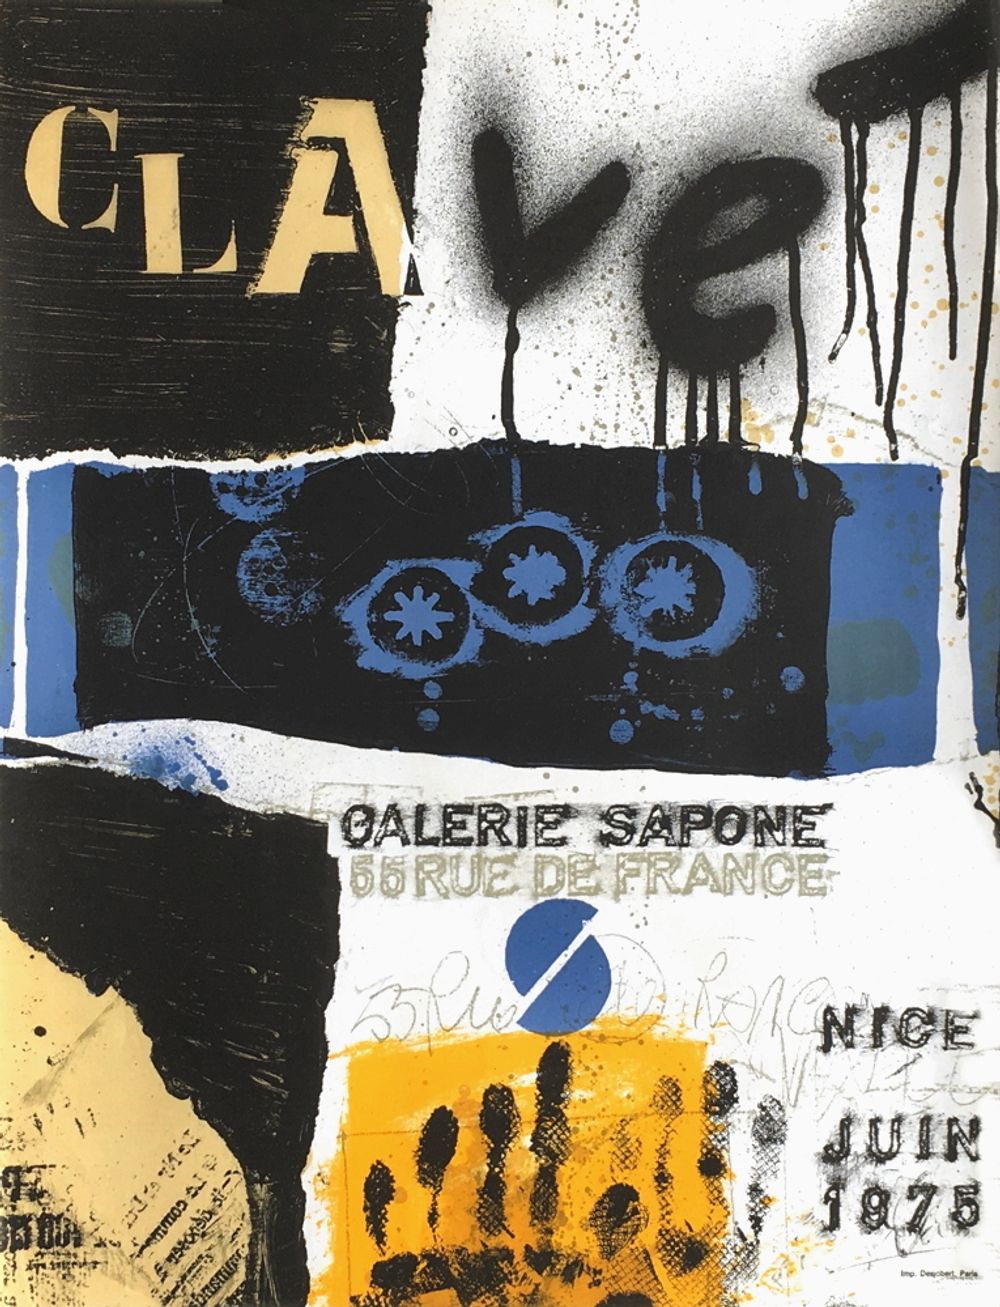 Expo 75 - Galerie Sapone